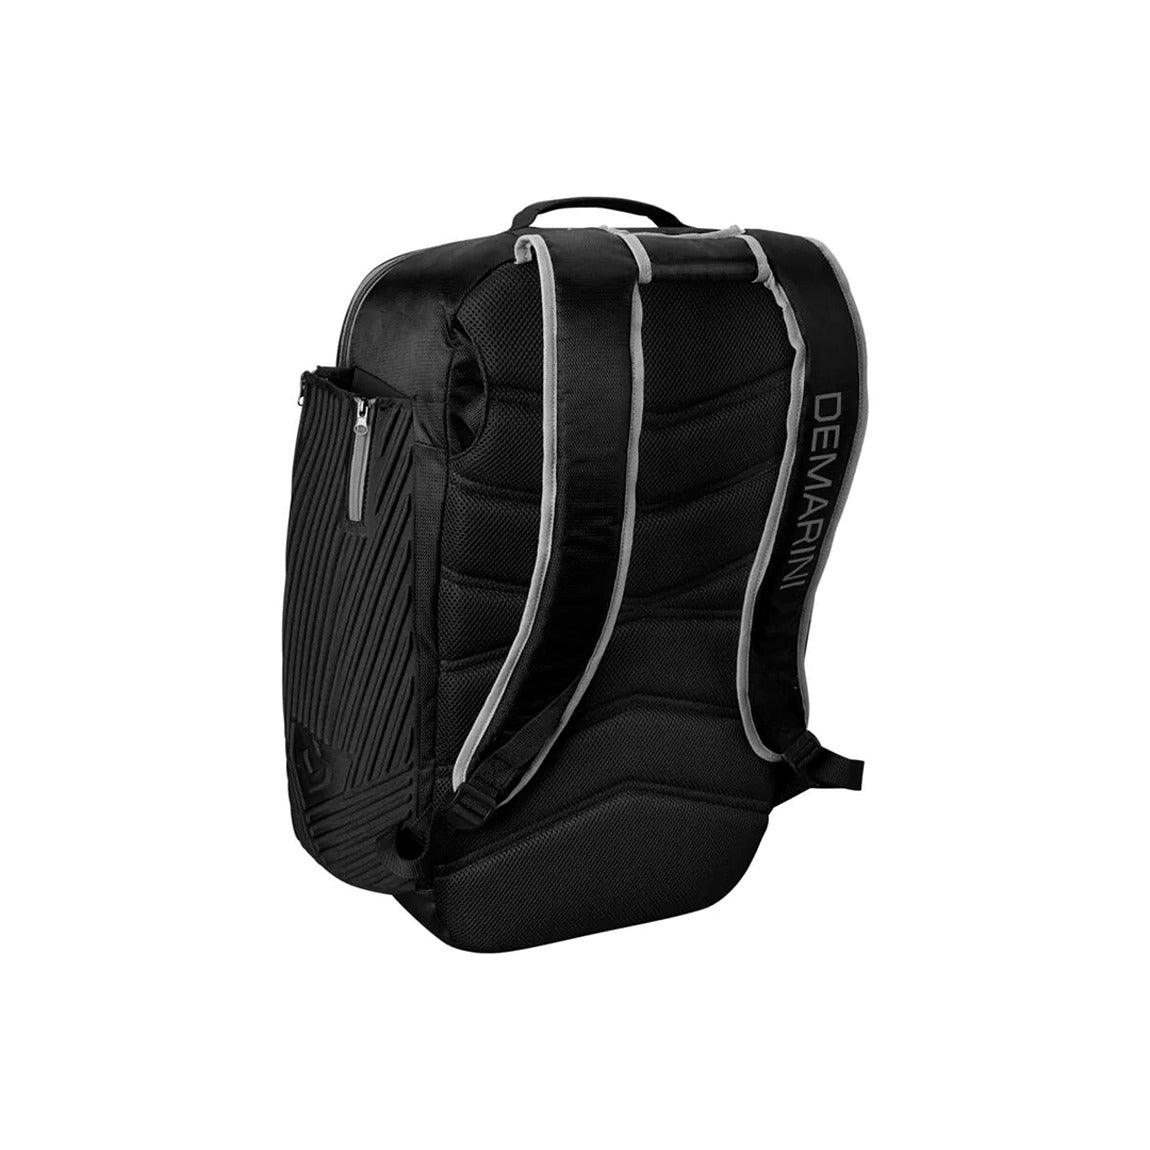 Spectre Backpack - Sports Excellence